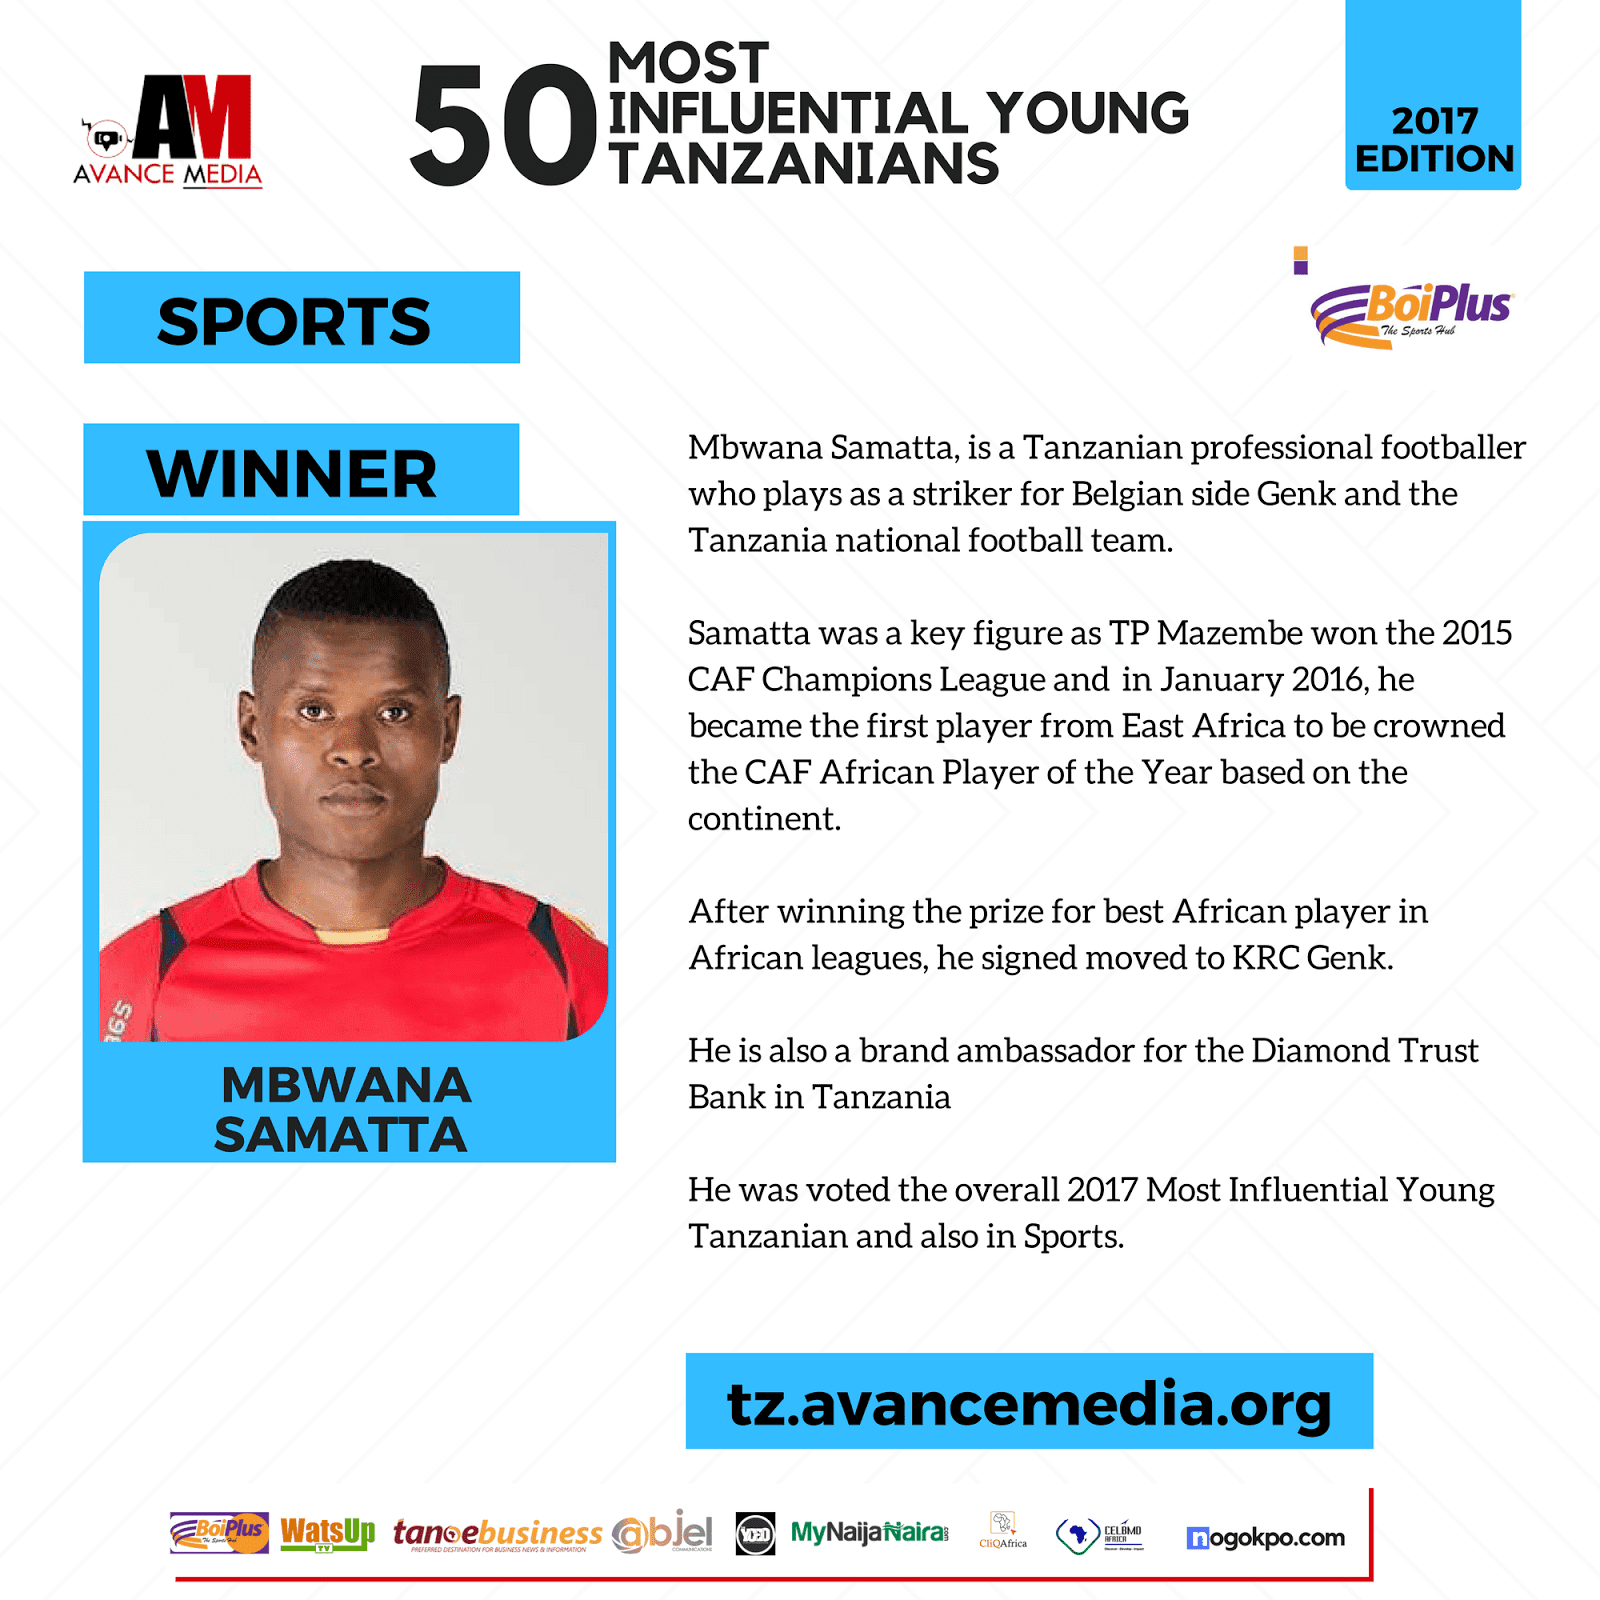 THE YCEO: Mbwana Samatta Voted 2017 Most Influential Young Tanzanian 